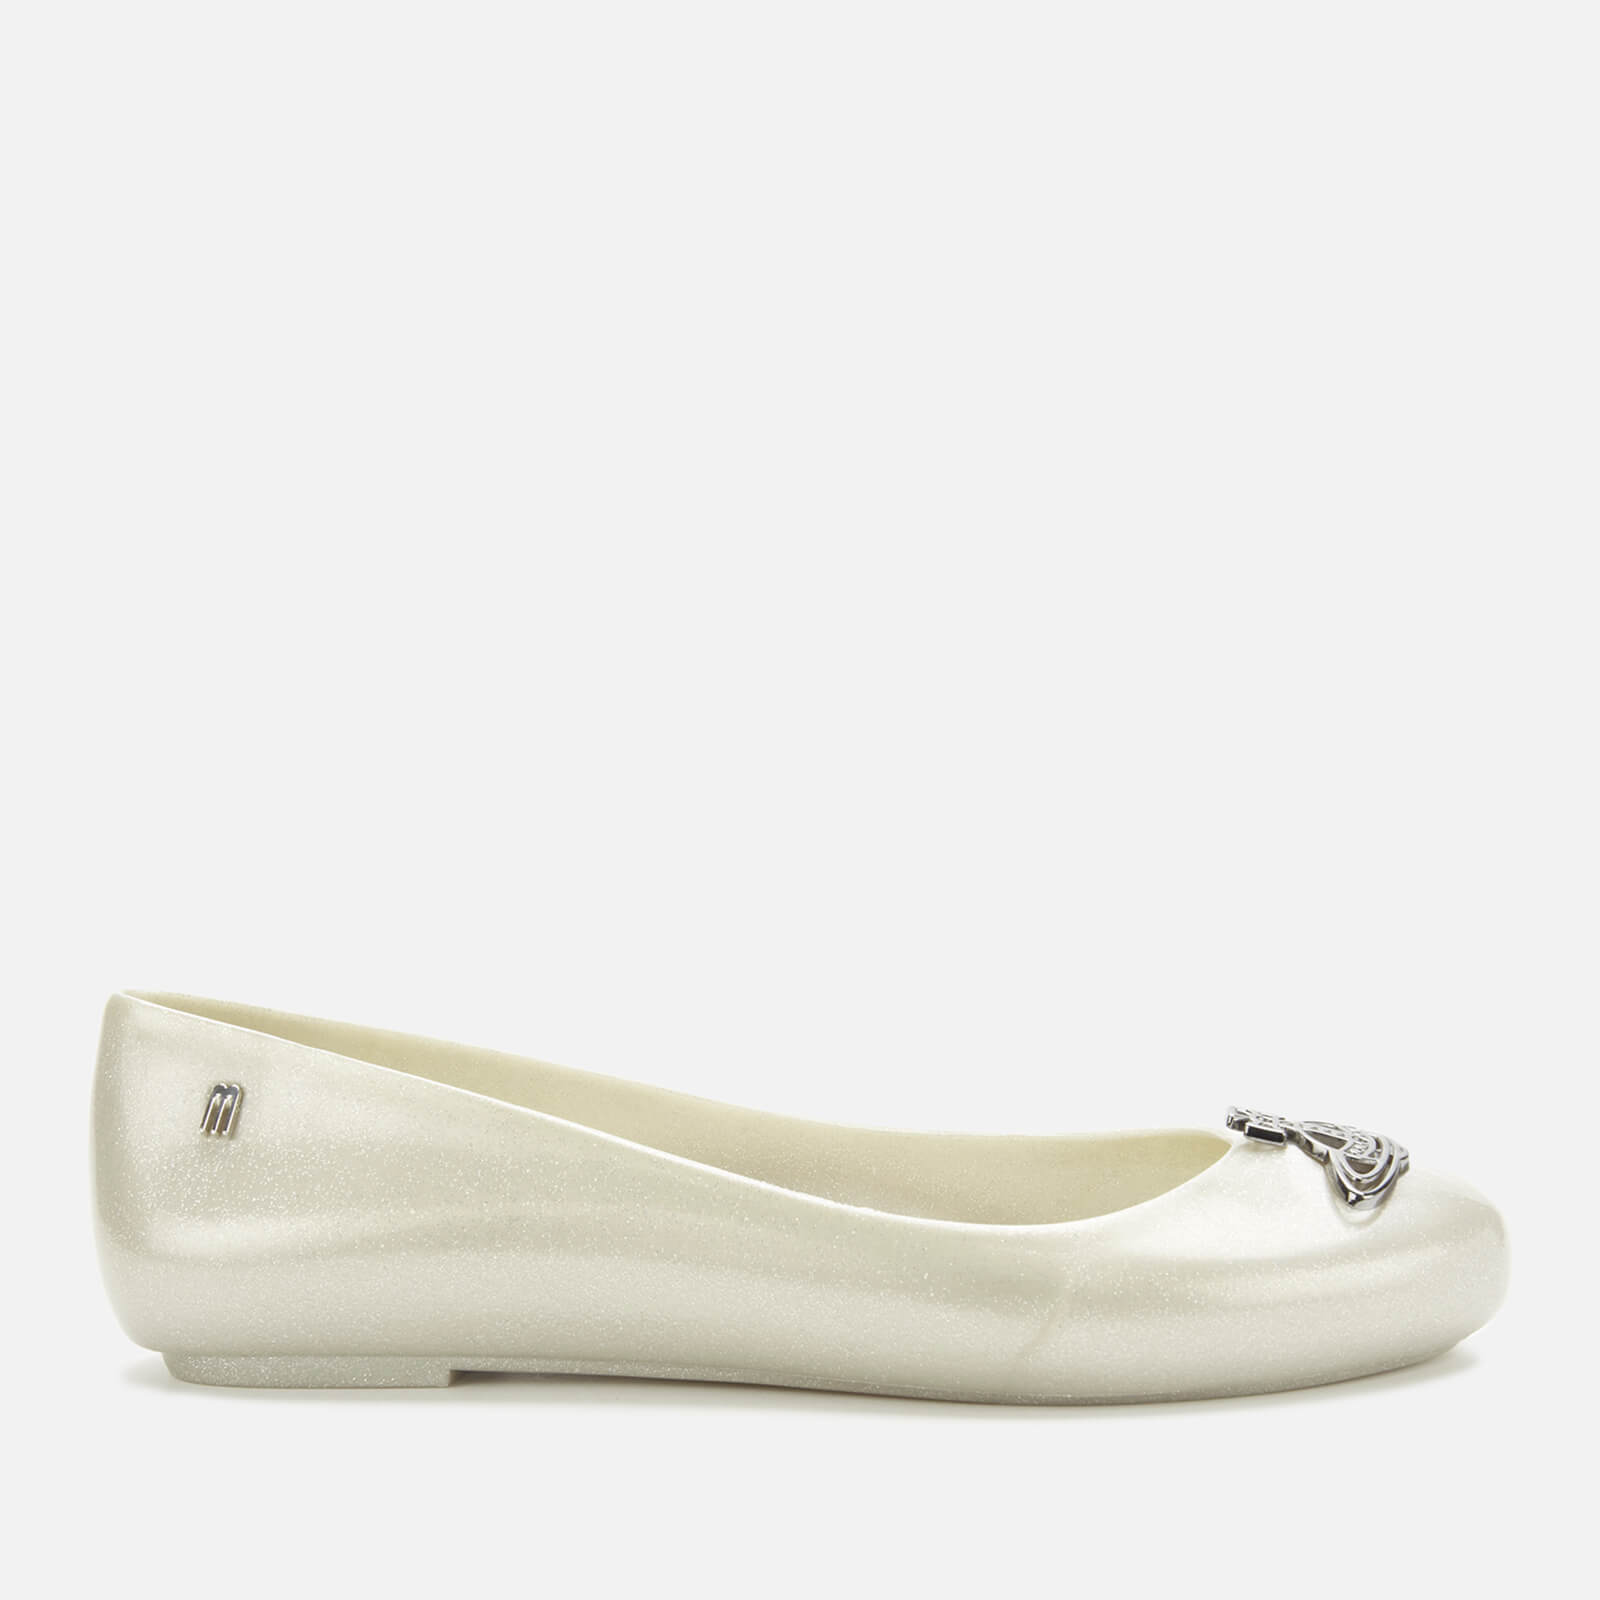 Vivienne Westwood for Melissa Women's Space Love 23 Ballet Flats - Moon Shimmer Cut Out Orb - UK 4